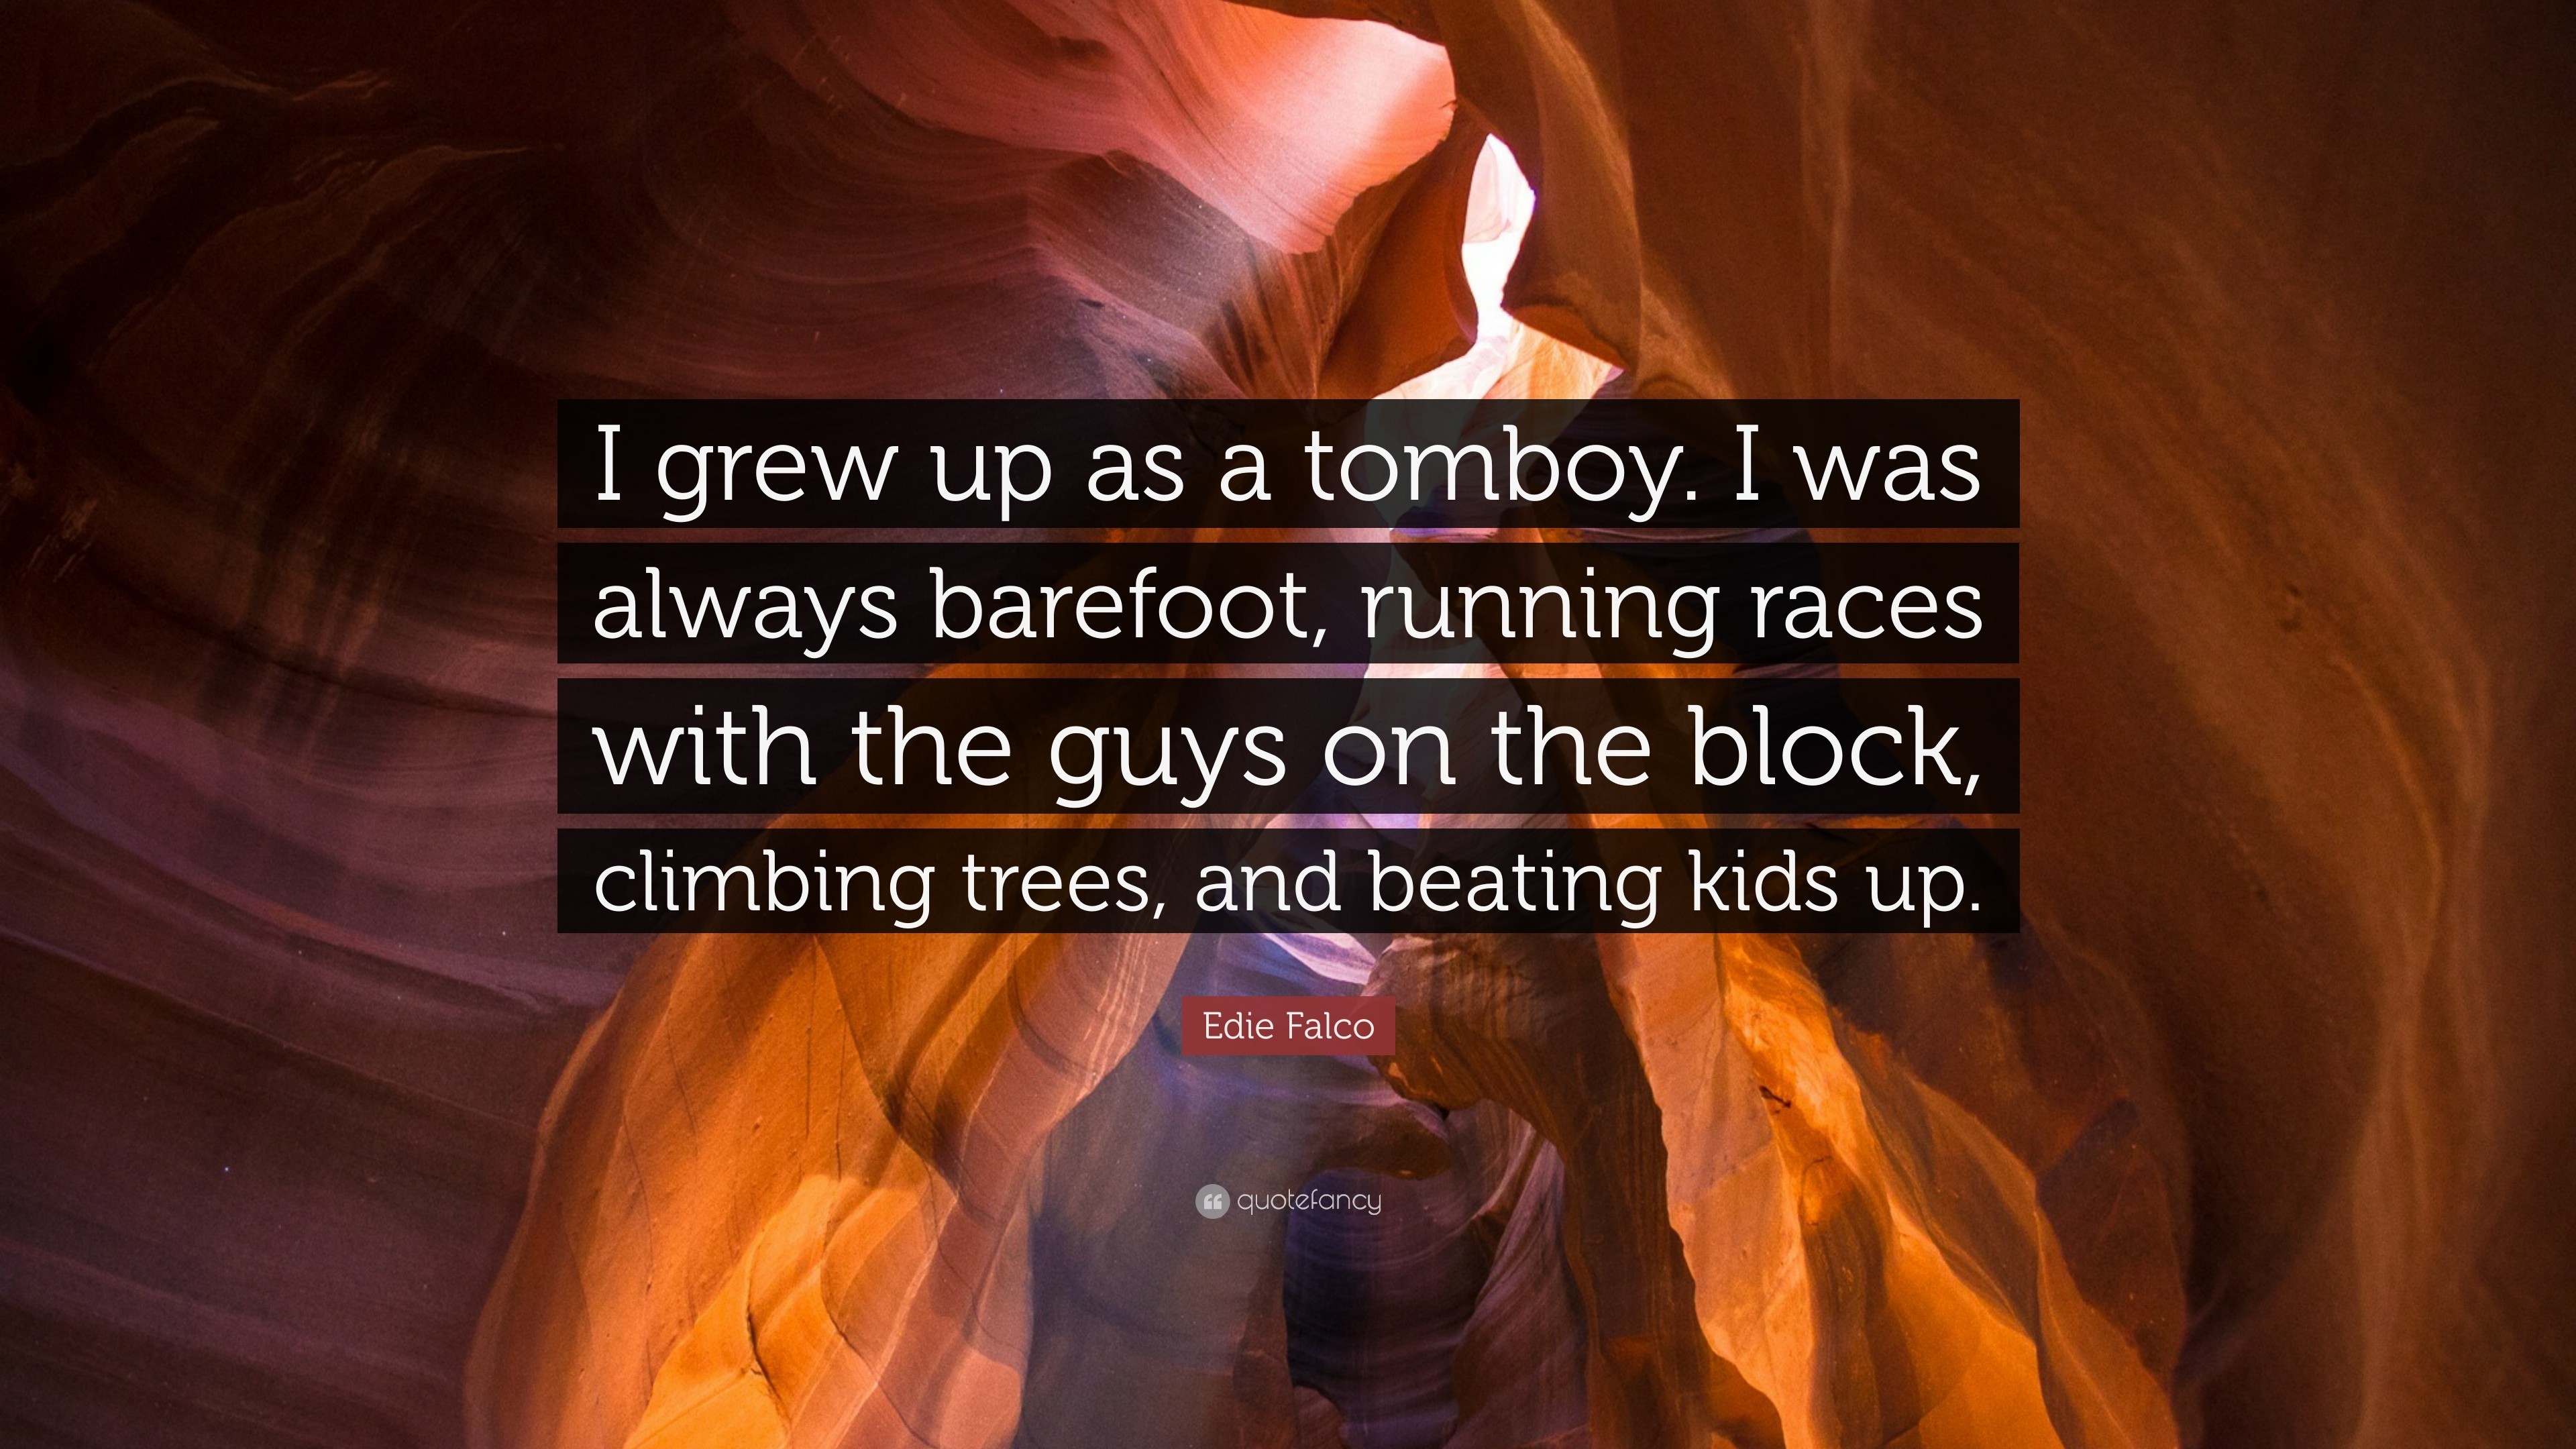 3840x2160 Edie Falco Quote: “I grew up as a tomboy. I was always barefoot